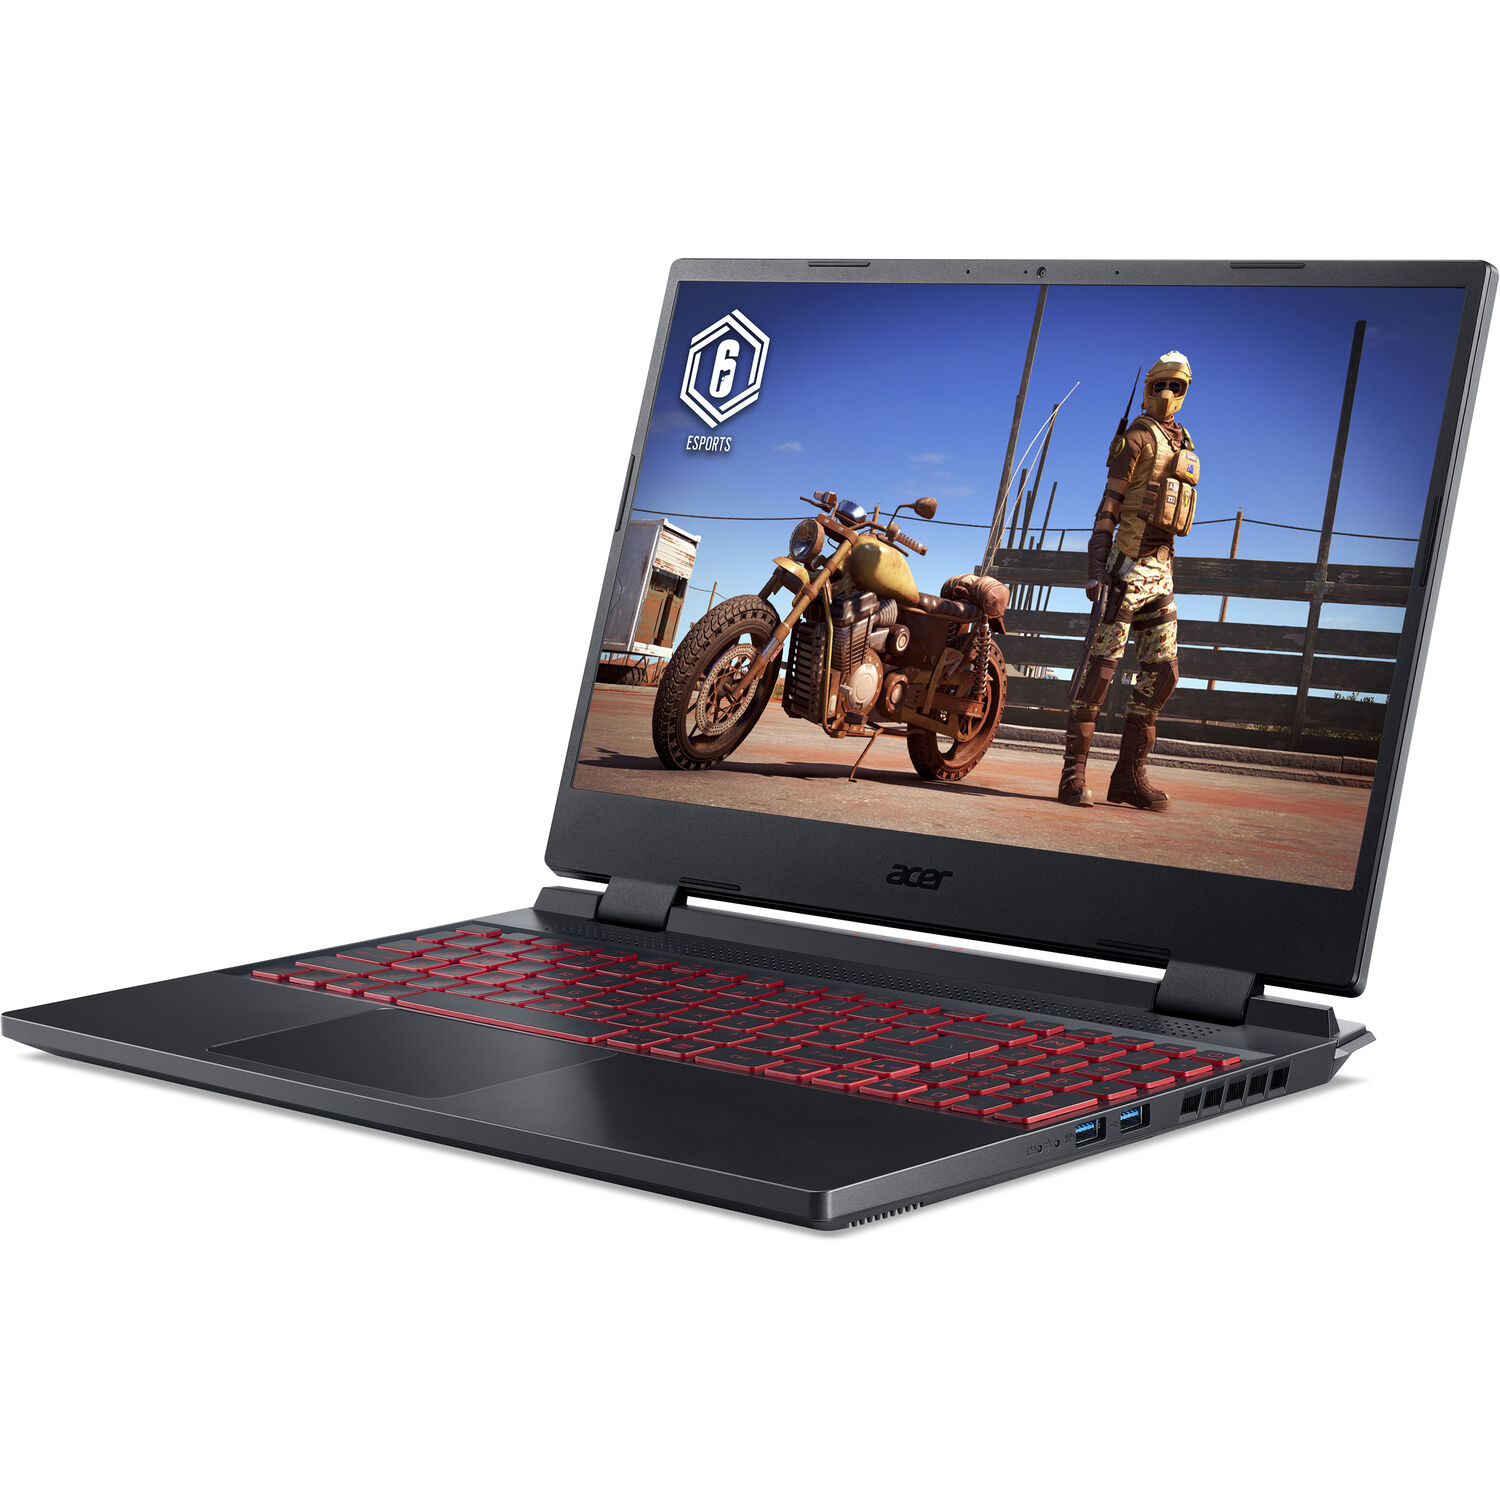 Acer Acer Nitro 5 Gaming/Entertainment Laptop (Intel i5-12500H 12-Core, 17.3in 144Hz Full HD (1920x1080), NVIDIA RTX 3050, 16GB RAM, 1TB PCIe SSD, Backlit KB, Win 11 Home) - image 3 of 7